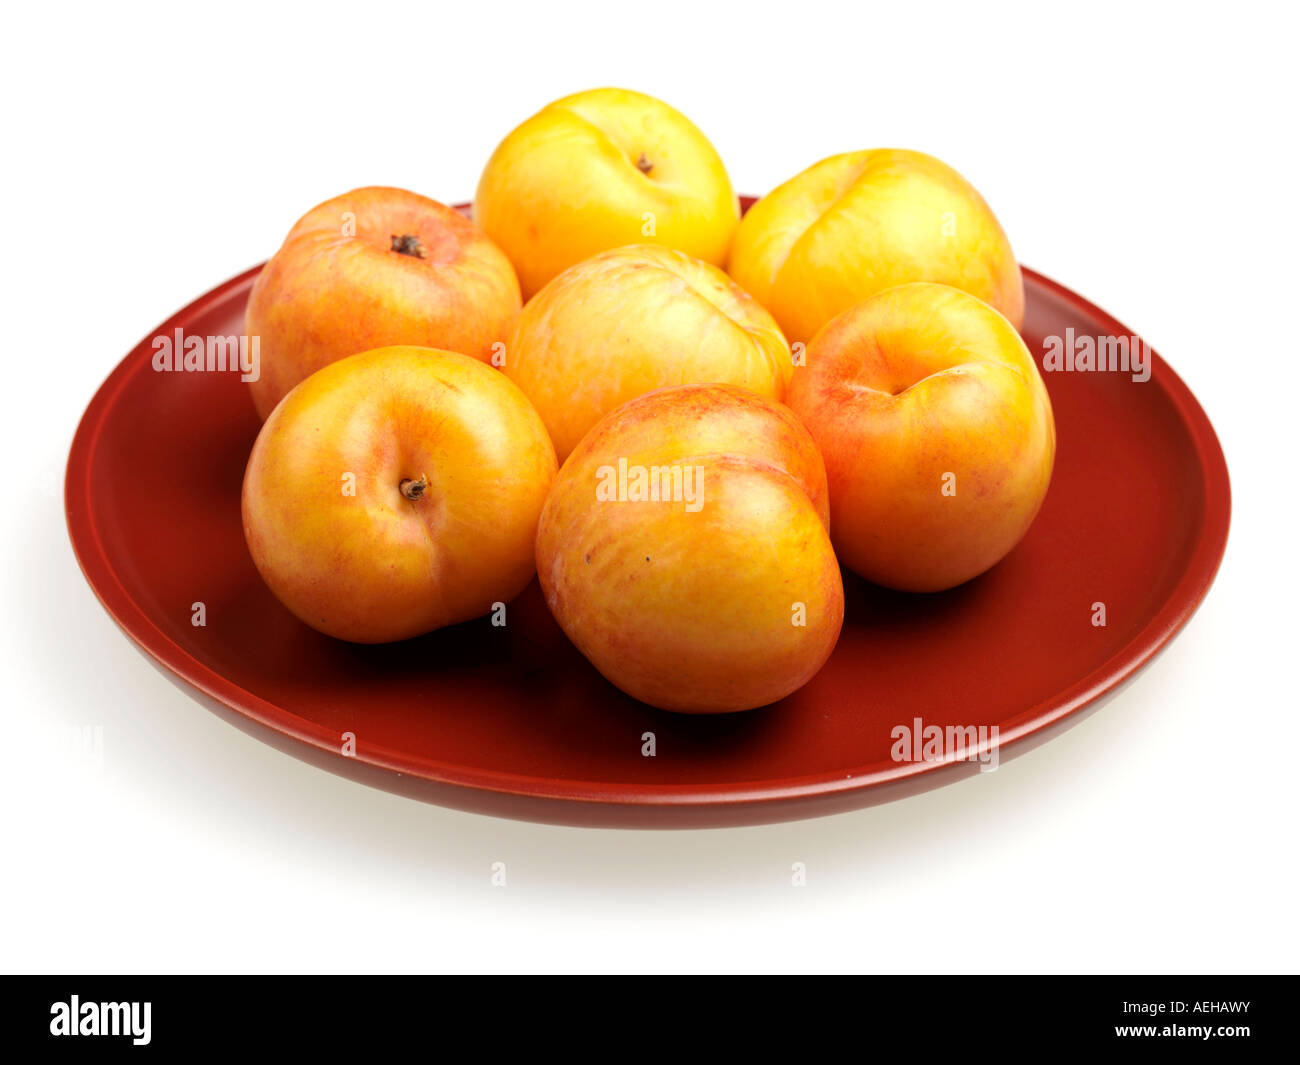 Fresh Ripe Healthy Juicy Sweet Yellow Stone Fruit Plums Isolated Against A White Background With No People And A Clipping Path Stock Photo